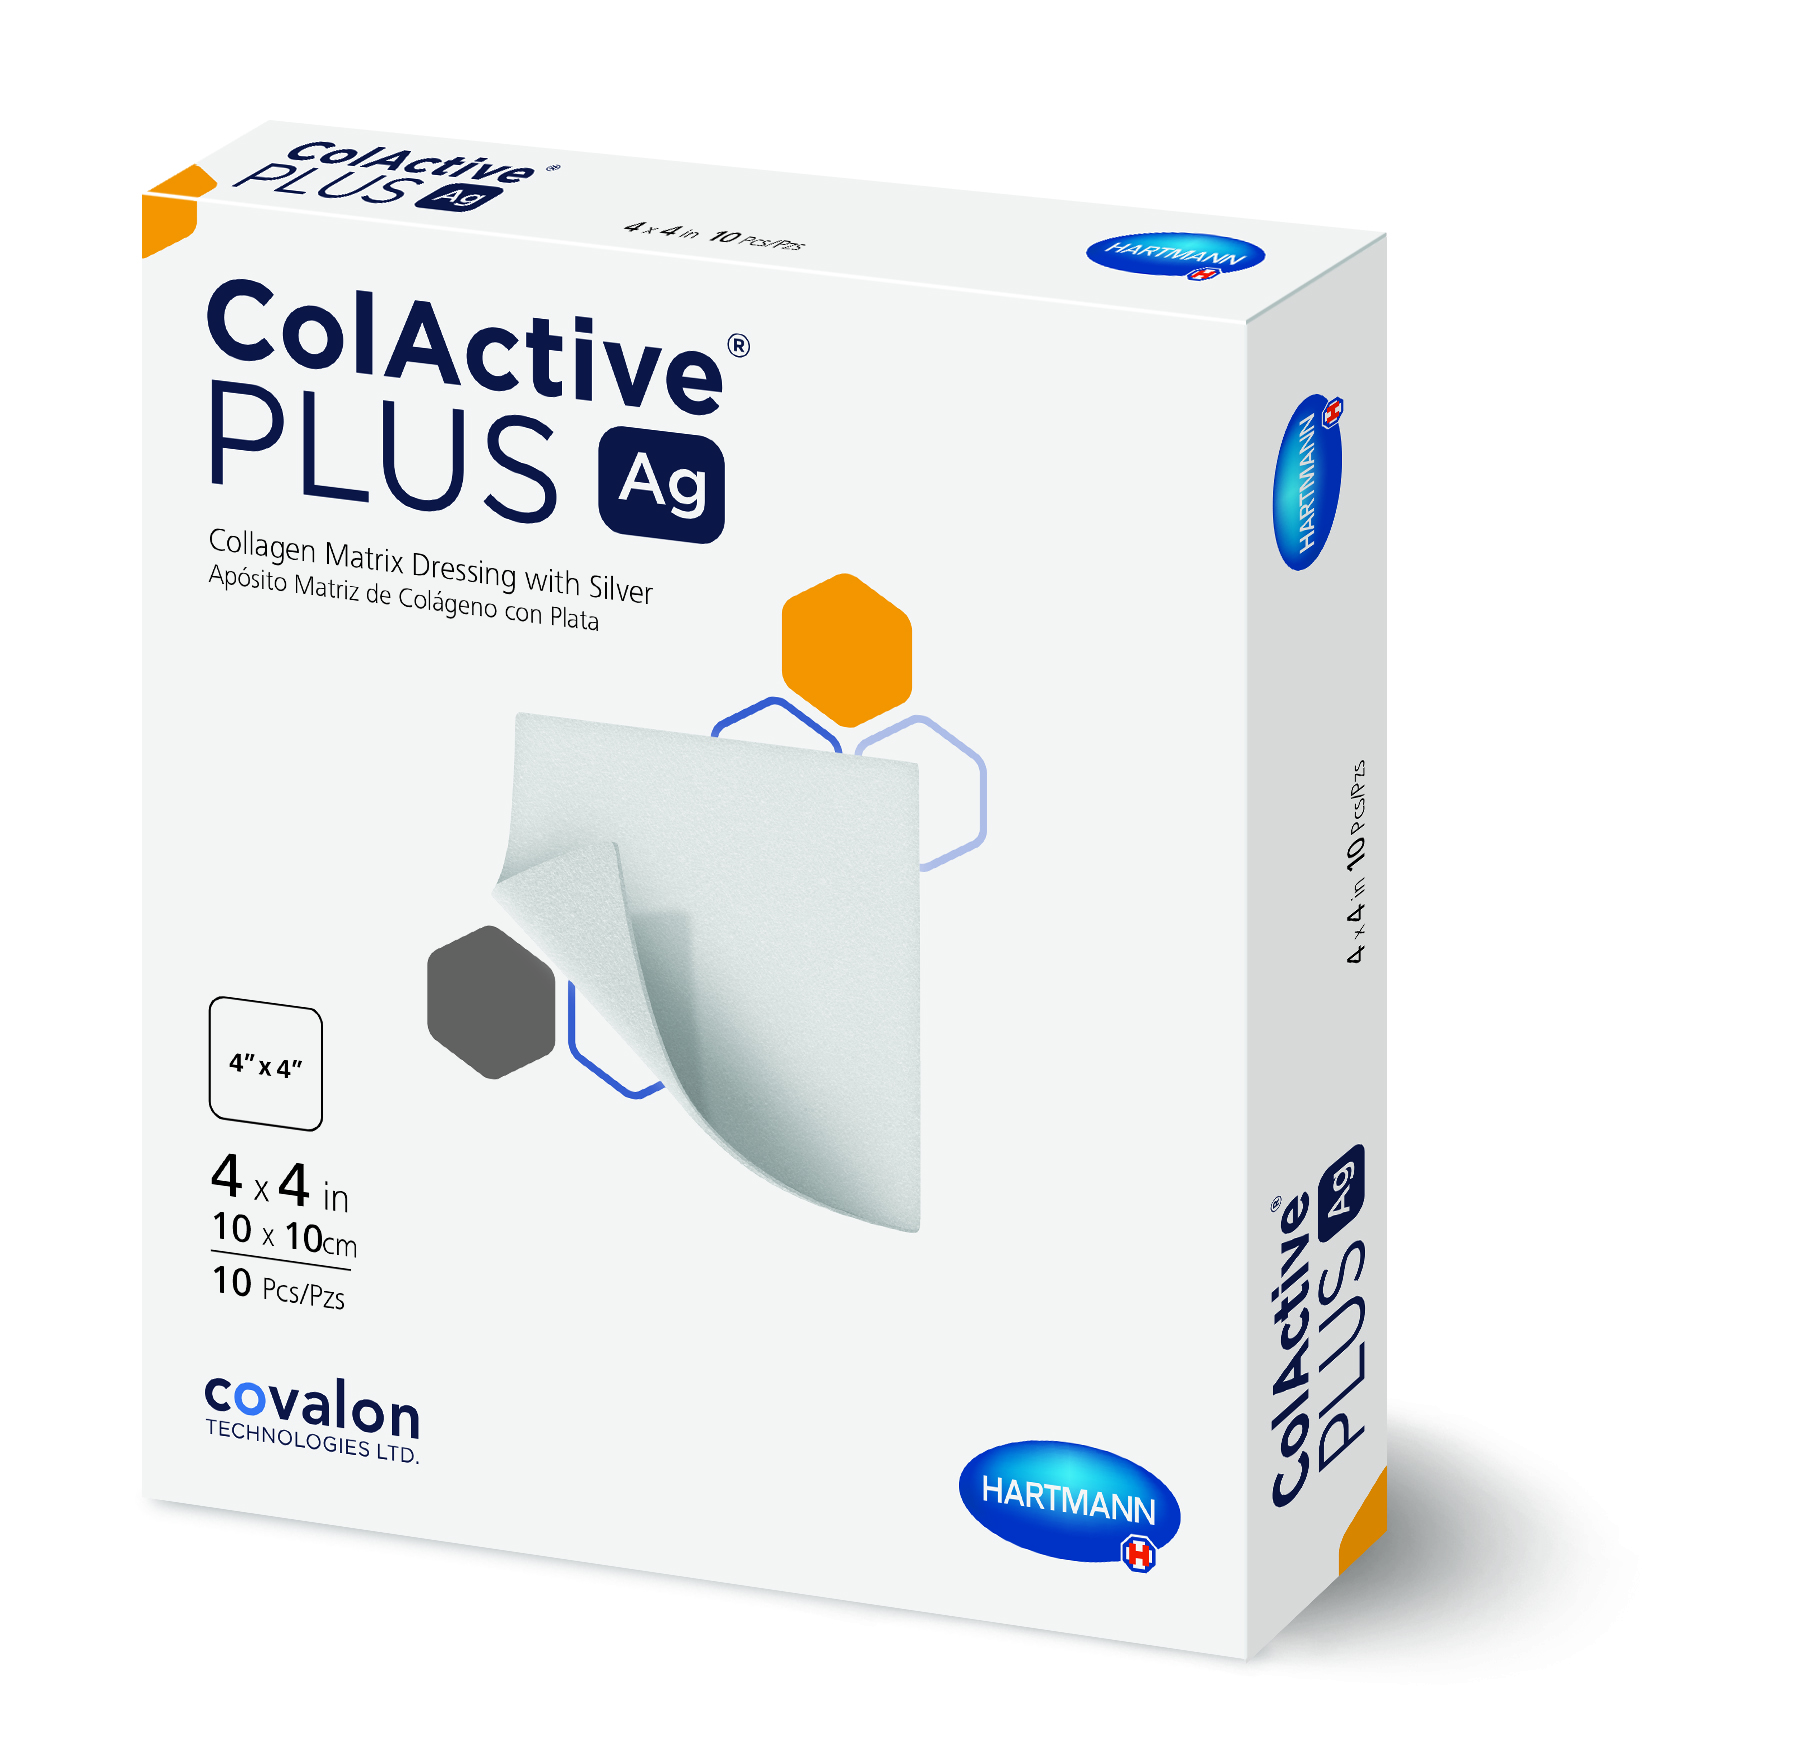 ColActive Plus Ag Collagen Matrix Dressing with Silver